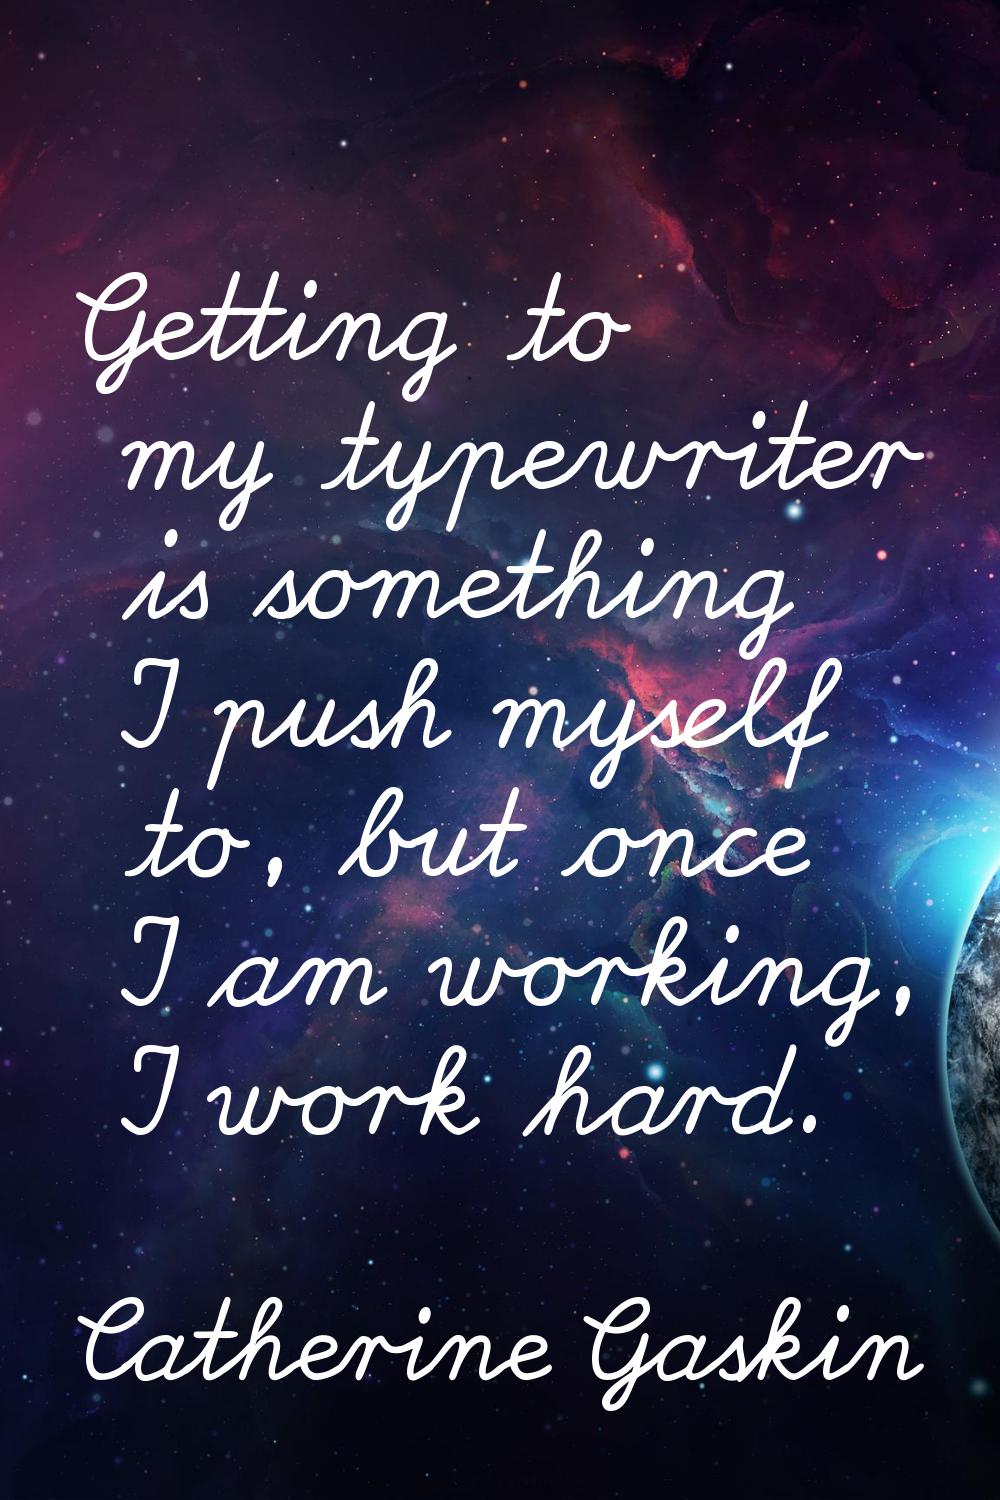 Getting to my typewriter is something I push myself to, but once I am working, I work hard.